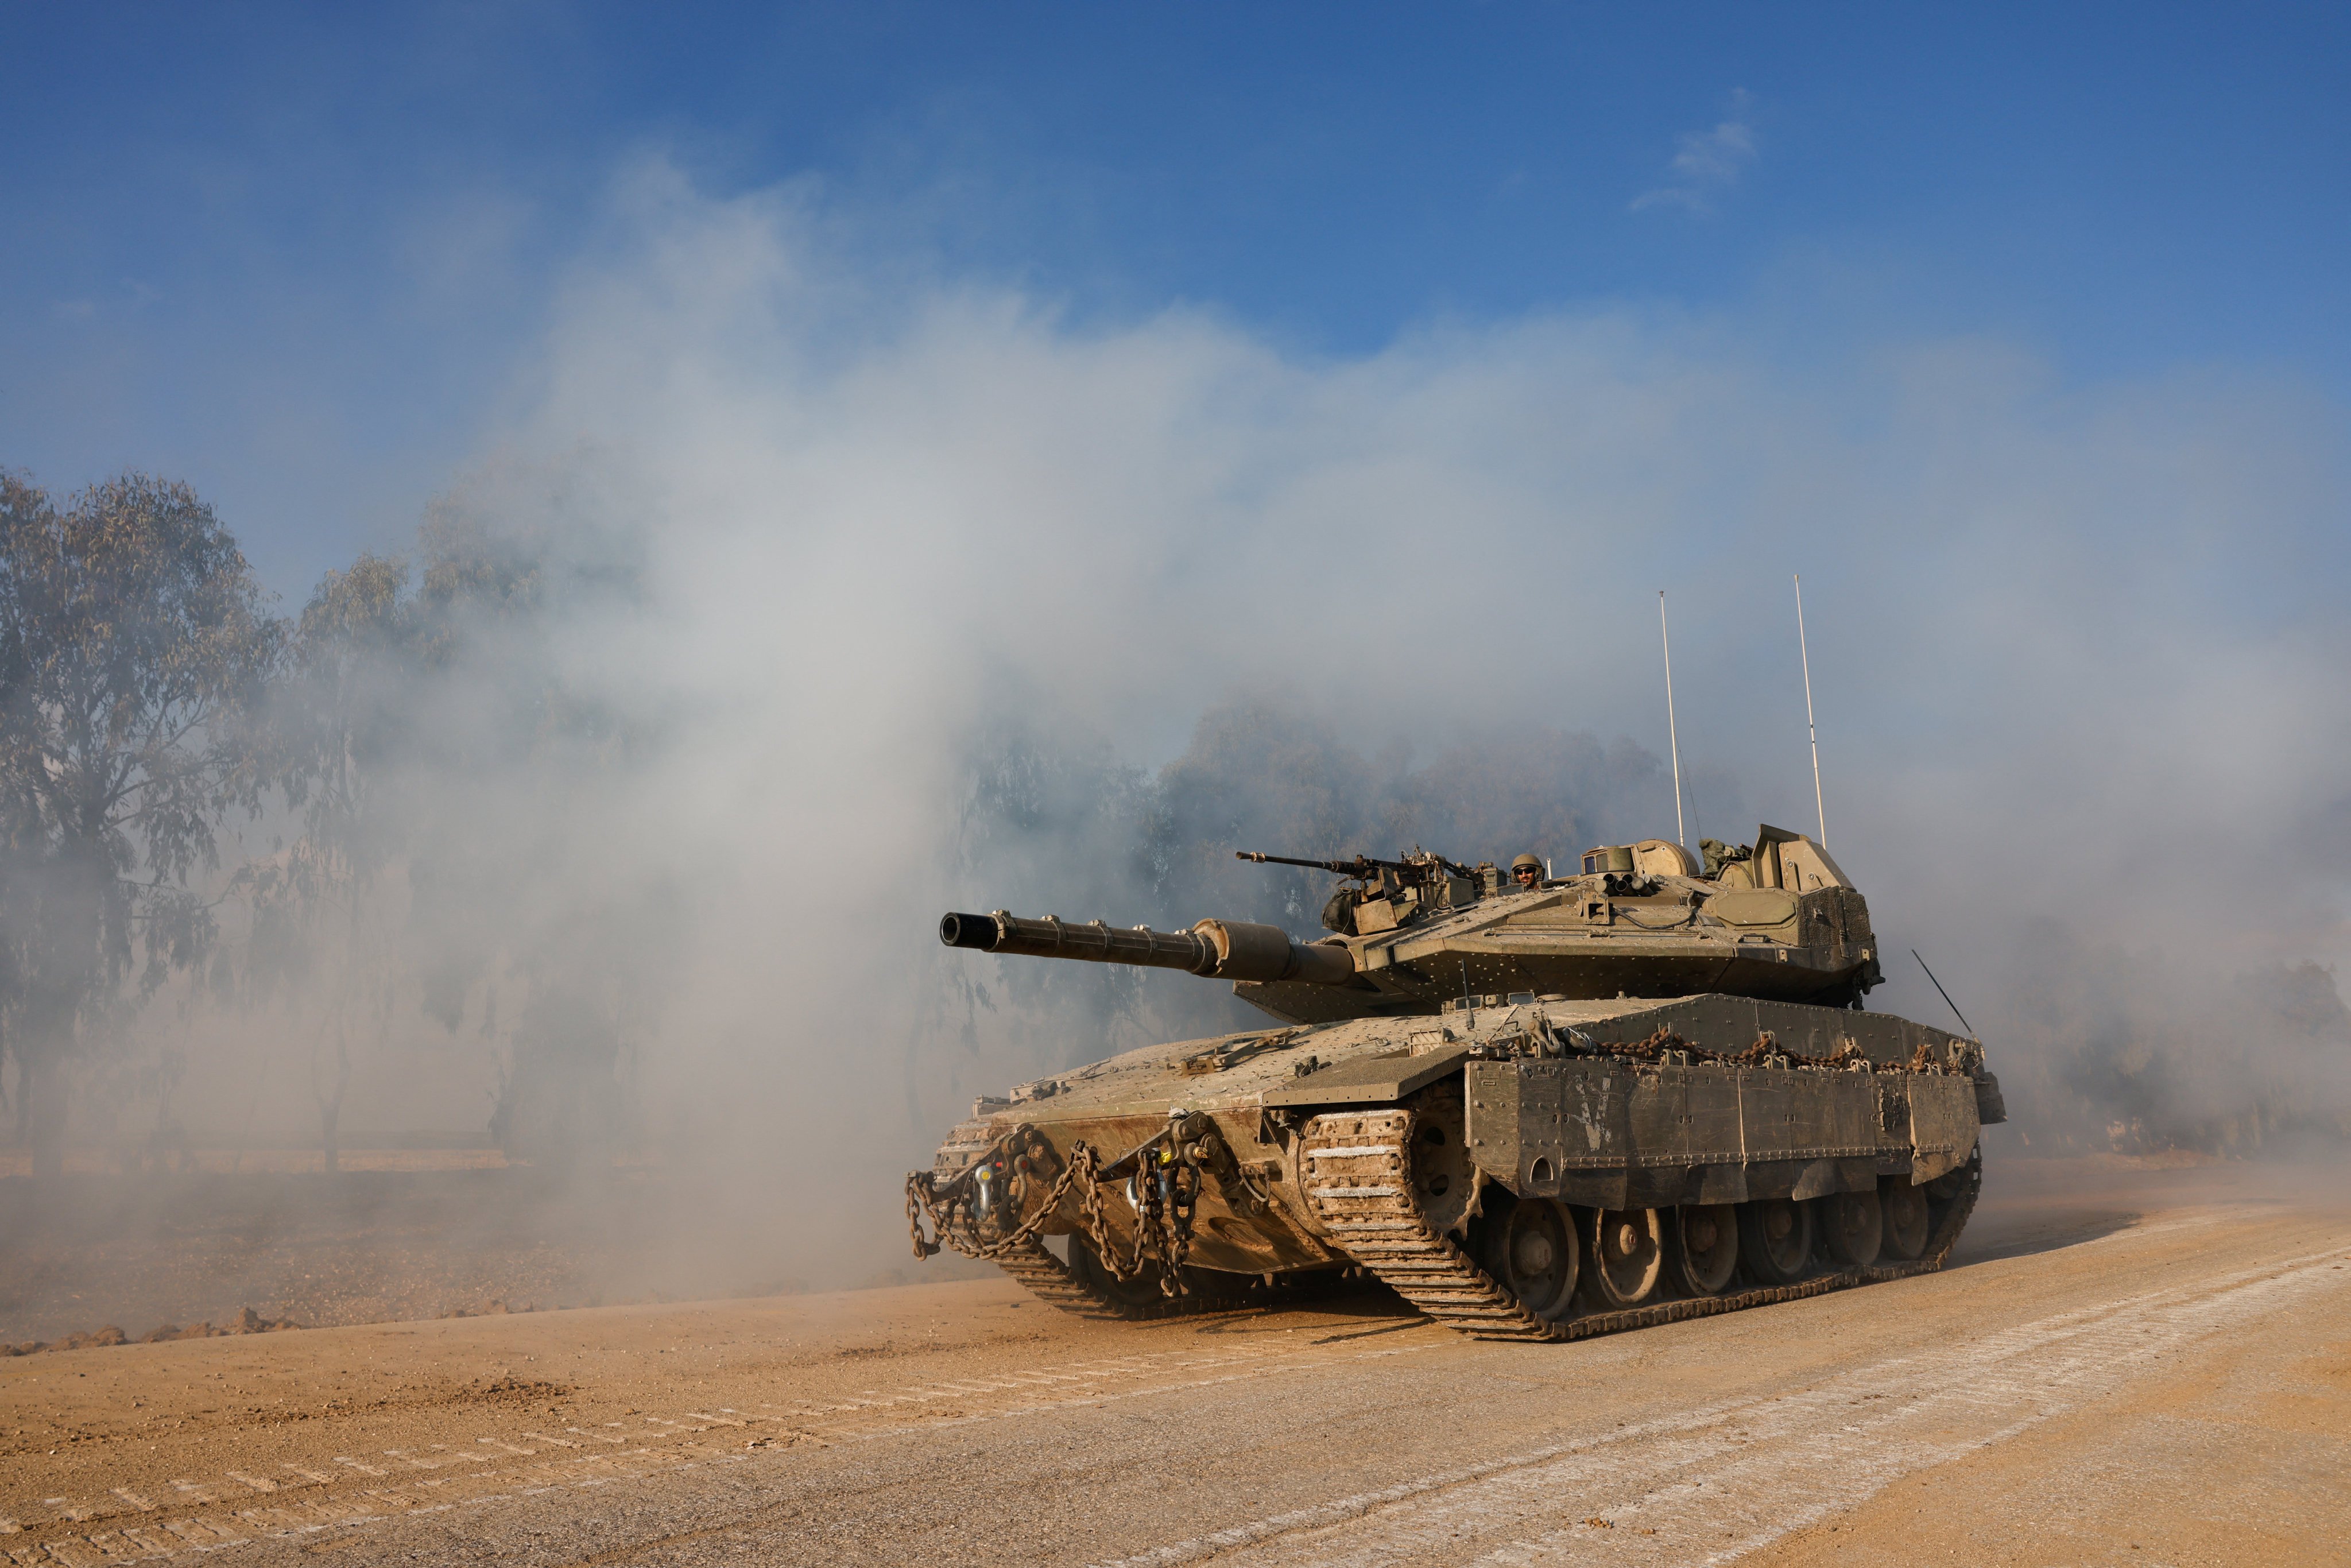 An Israeli tank manoeuvres near the Israel-Gaza border on Wednesday amid the ongoing conflict. Photo: Reuters